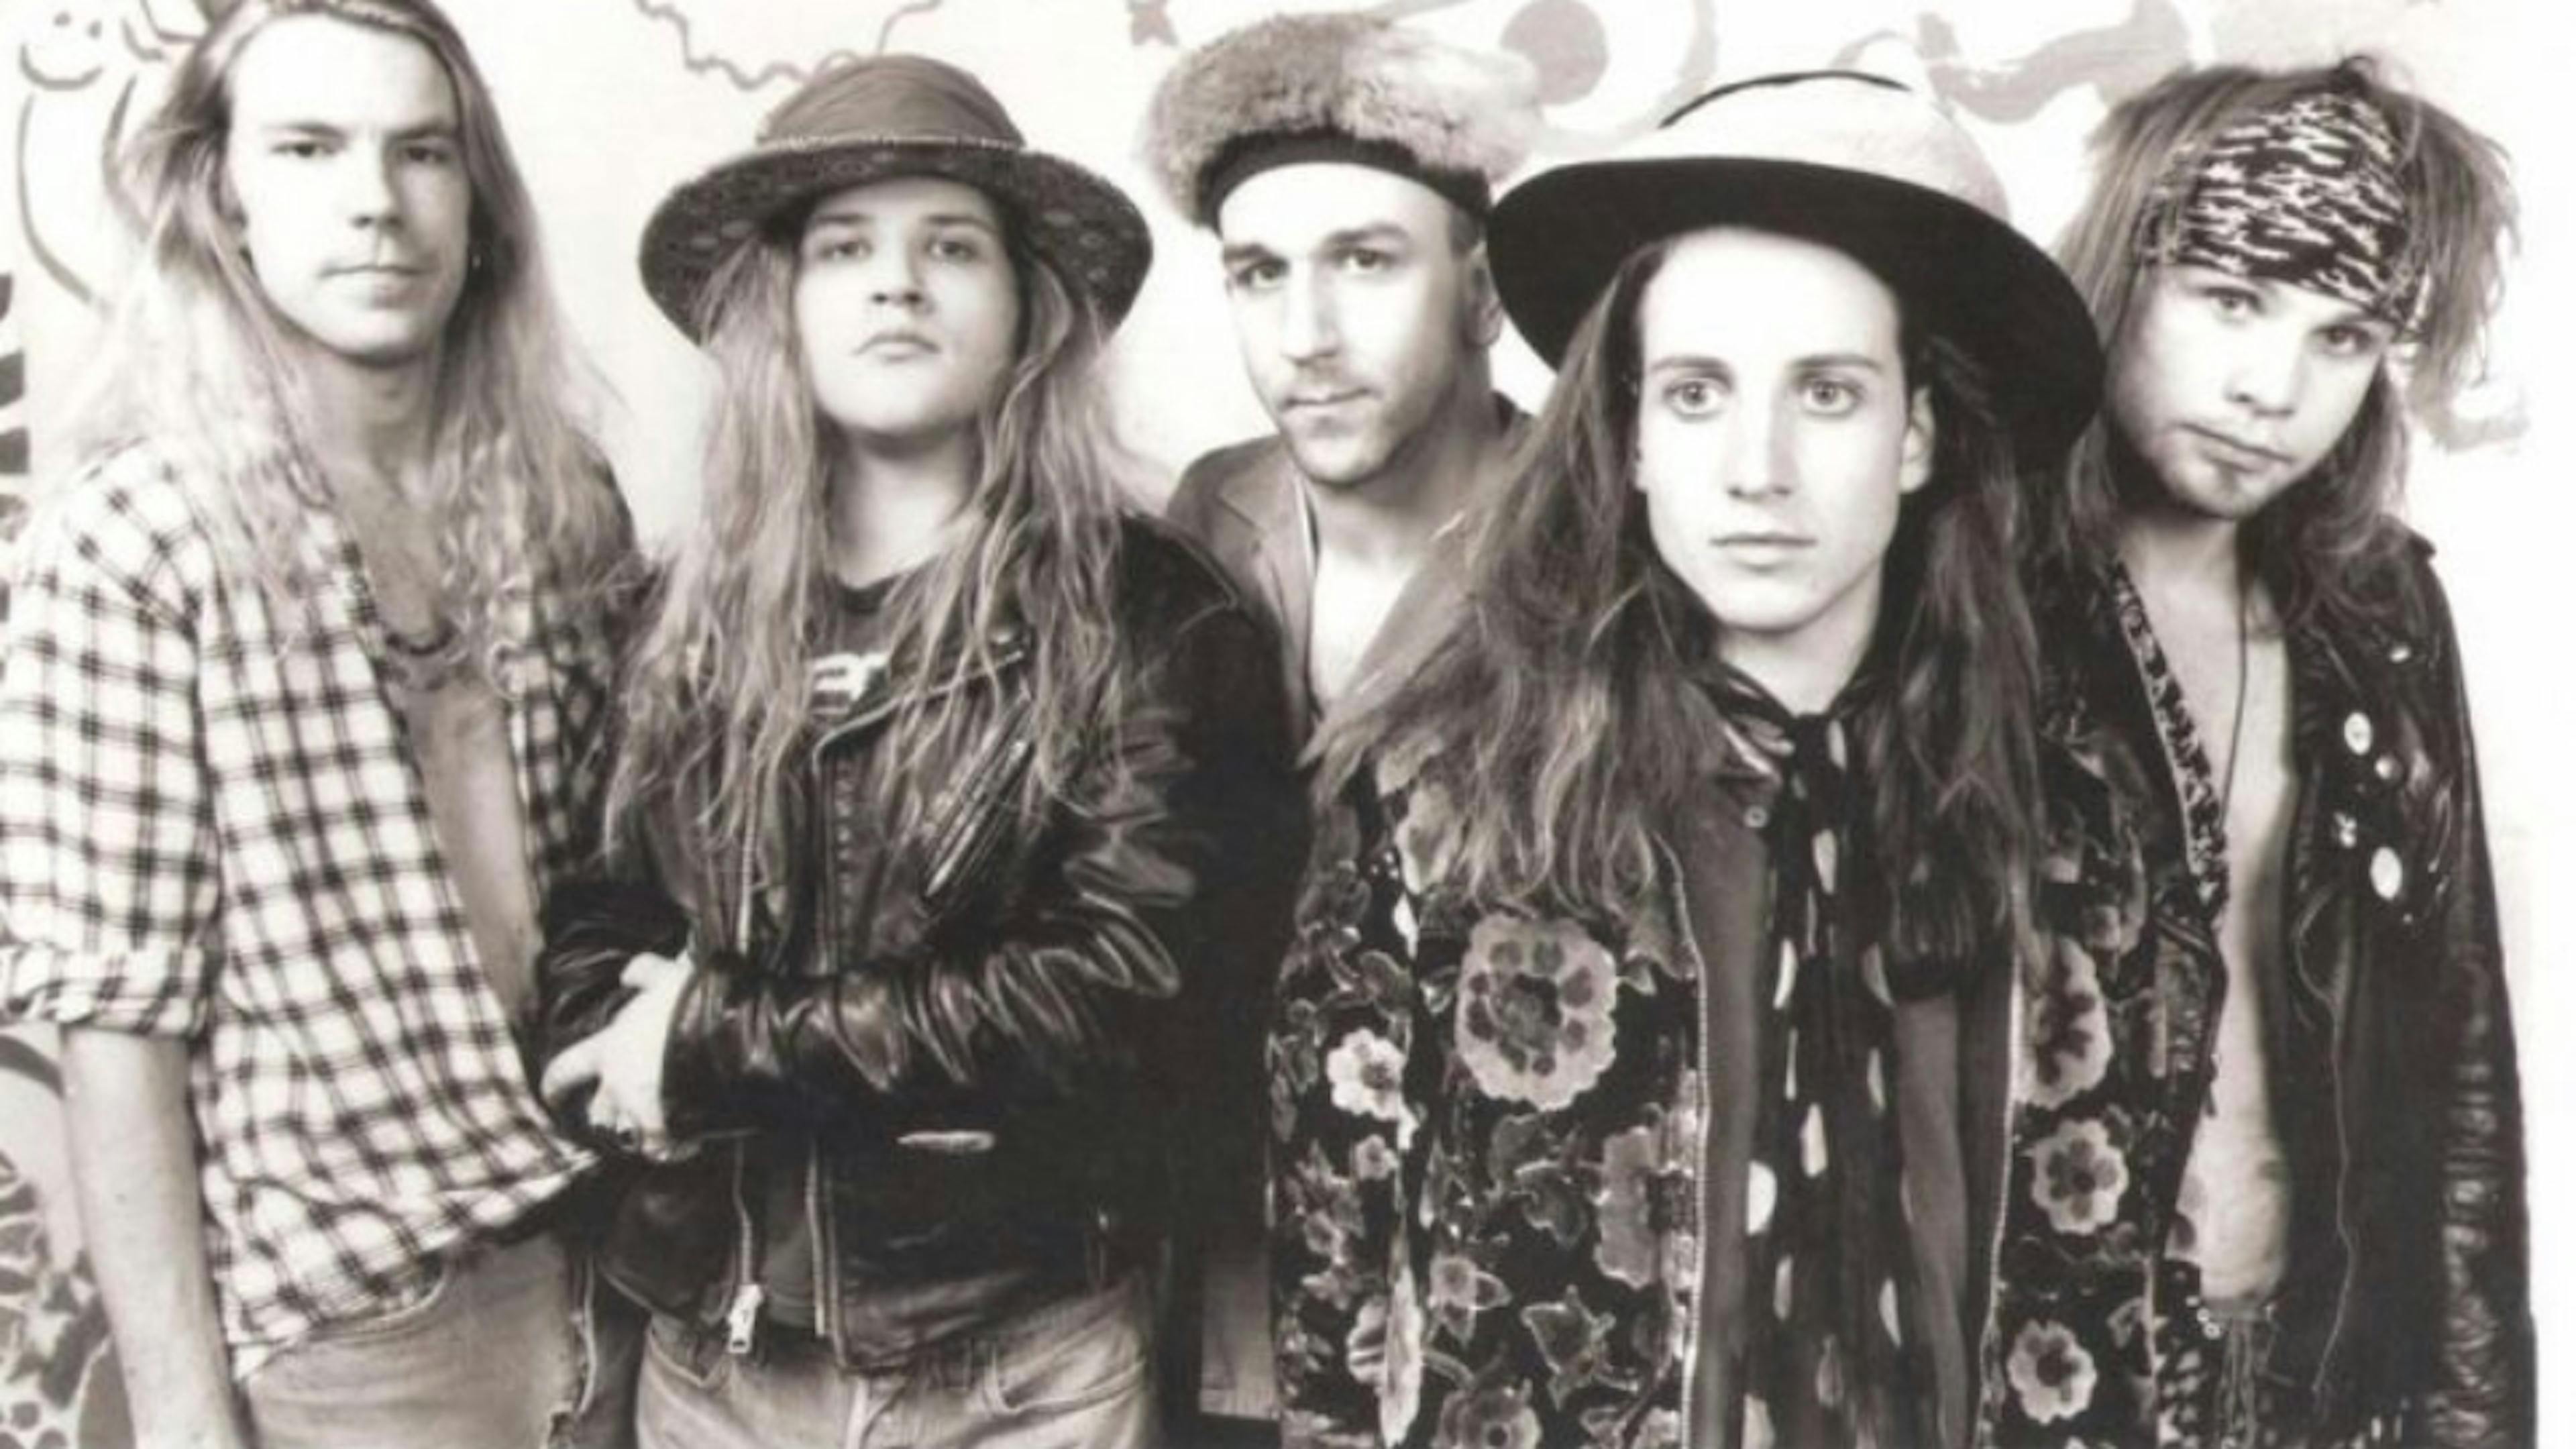 The life and legacy of Andrew Wood: The lost hero of grunge